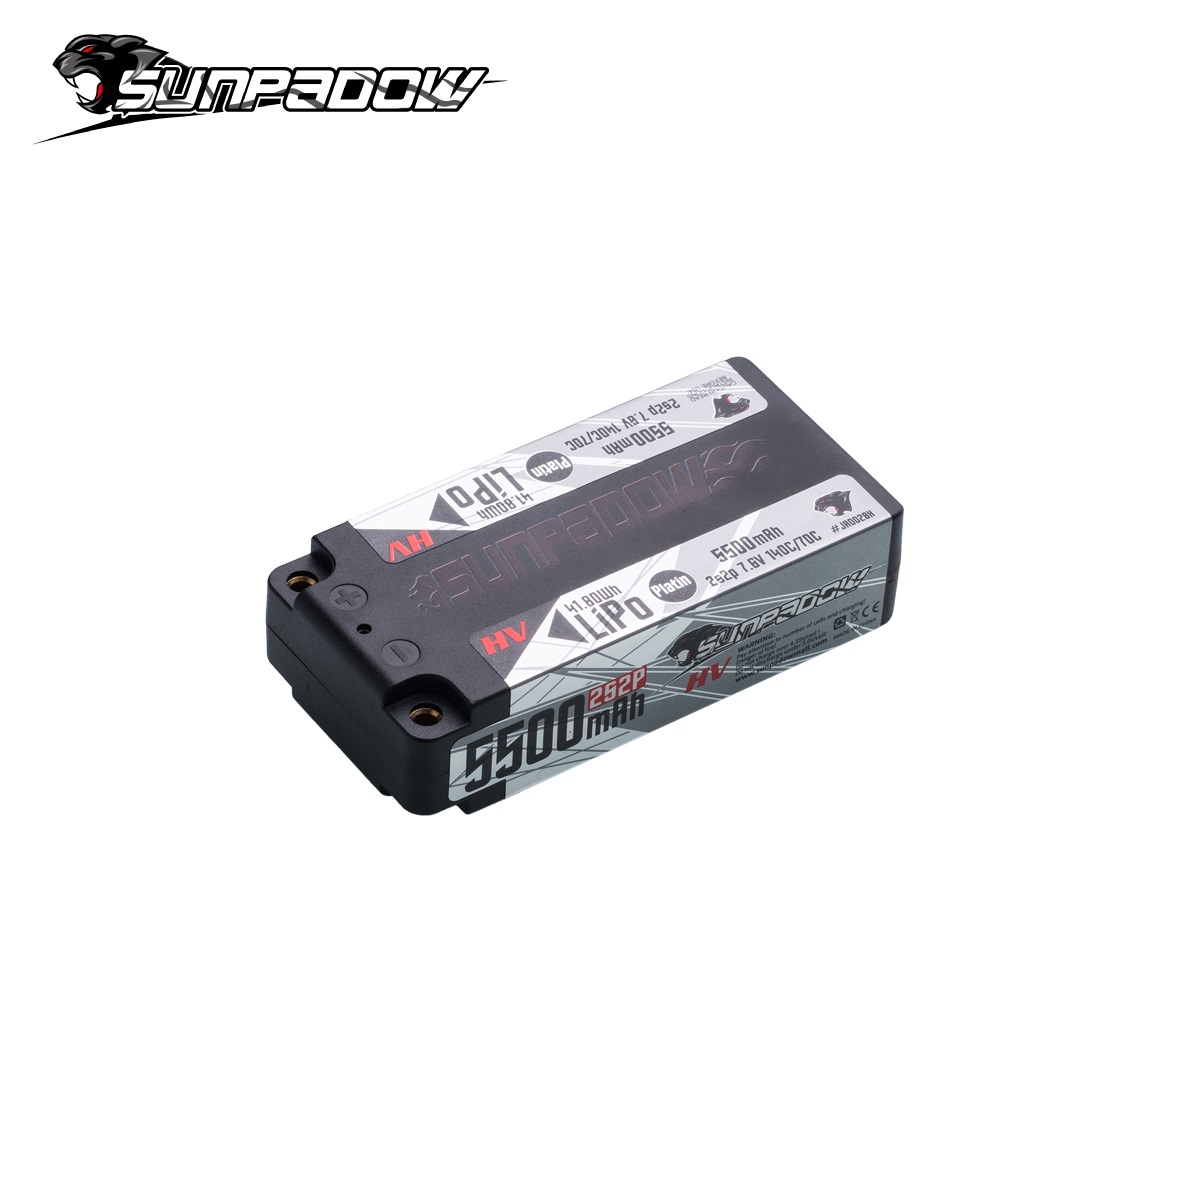 Understand the battery used by racers